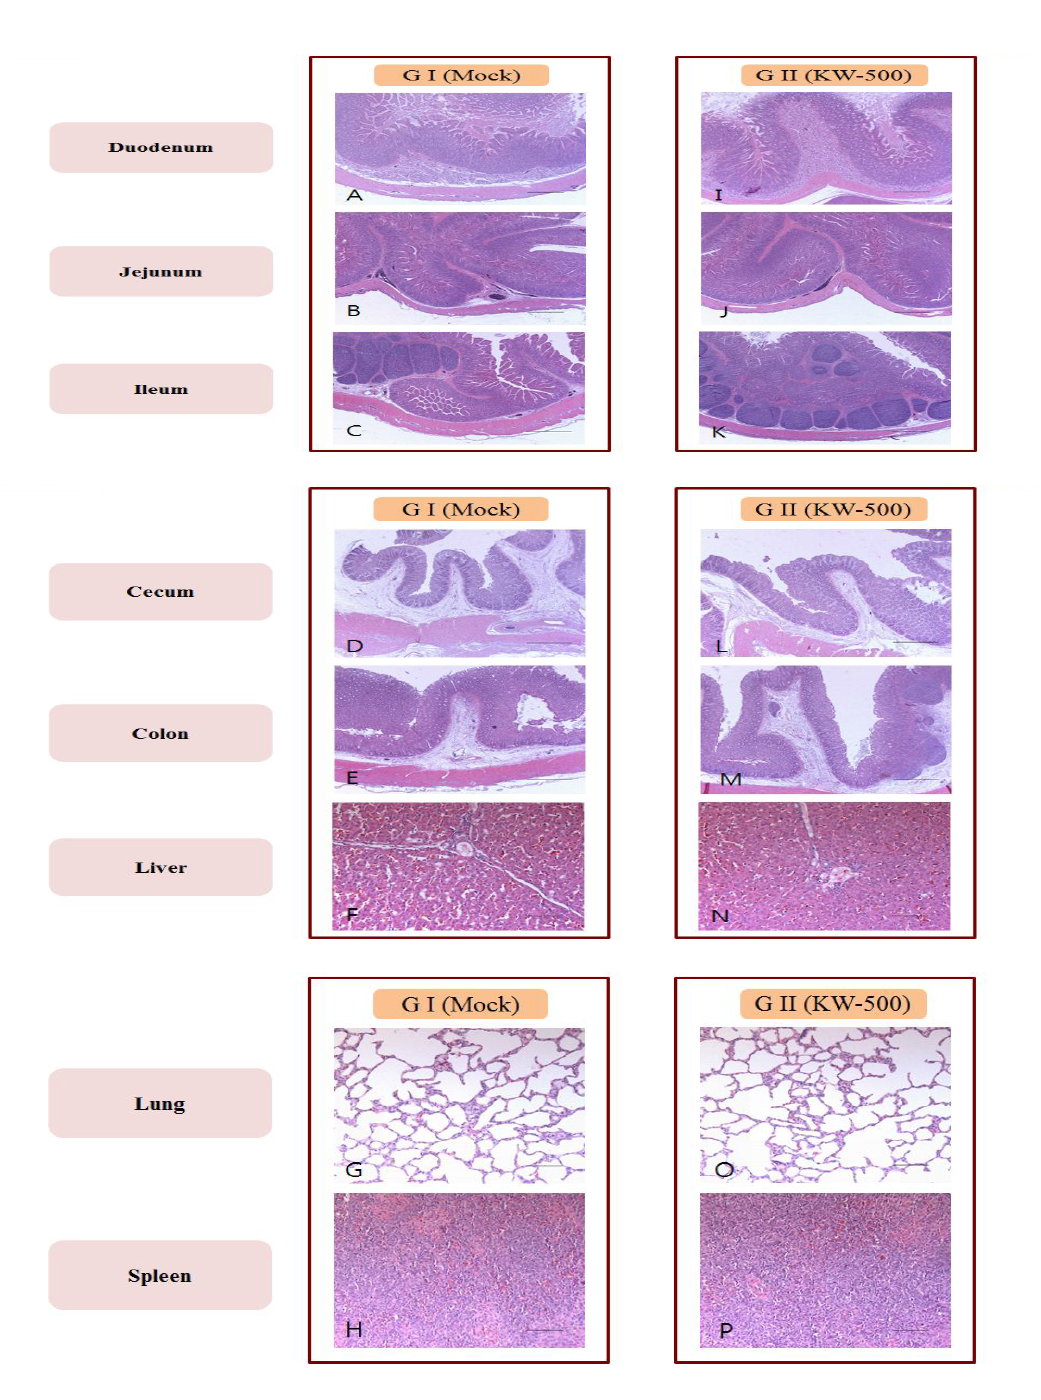 Comparison of histopathological changes in duodenum, jejunum, ileum, cecum, colon, liver, lung and spleen obtained from mock- and KW-500 administrat ed groups. Bars through Intestinal pictures = 1000 , ㎛ and bars of liver, lung and spleen pictures = 200 ㎛